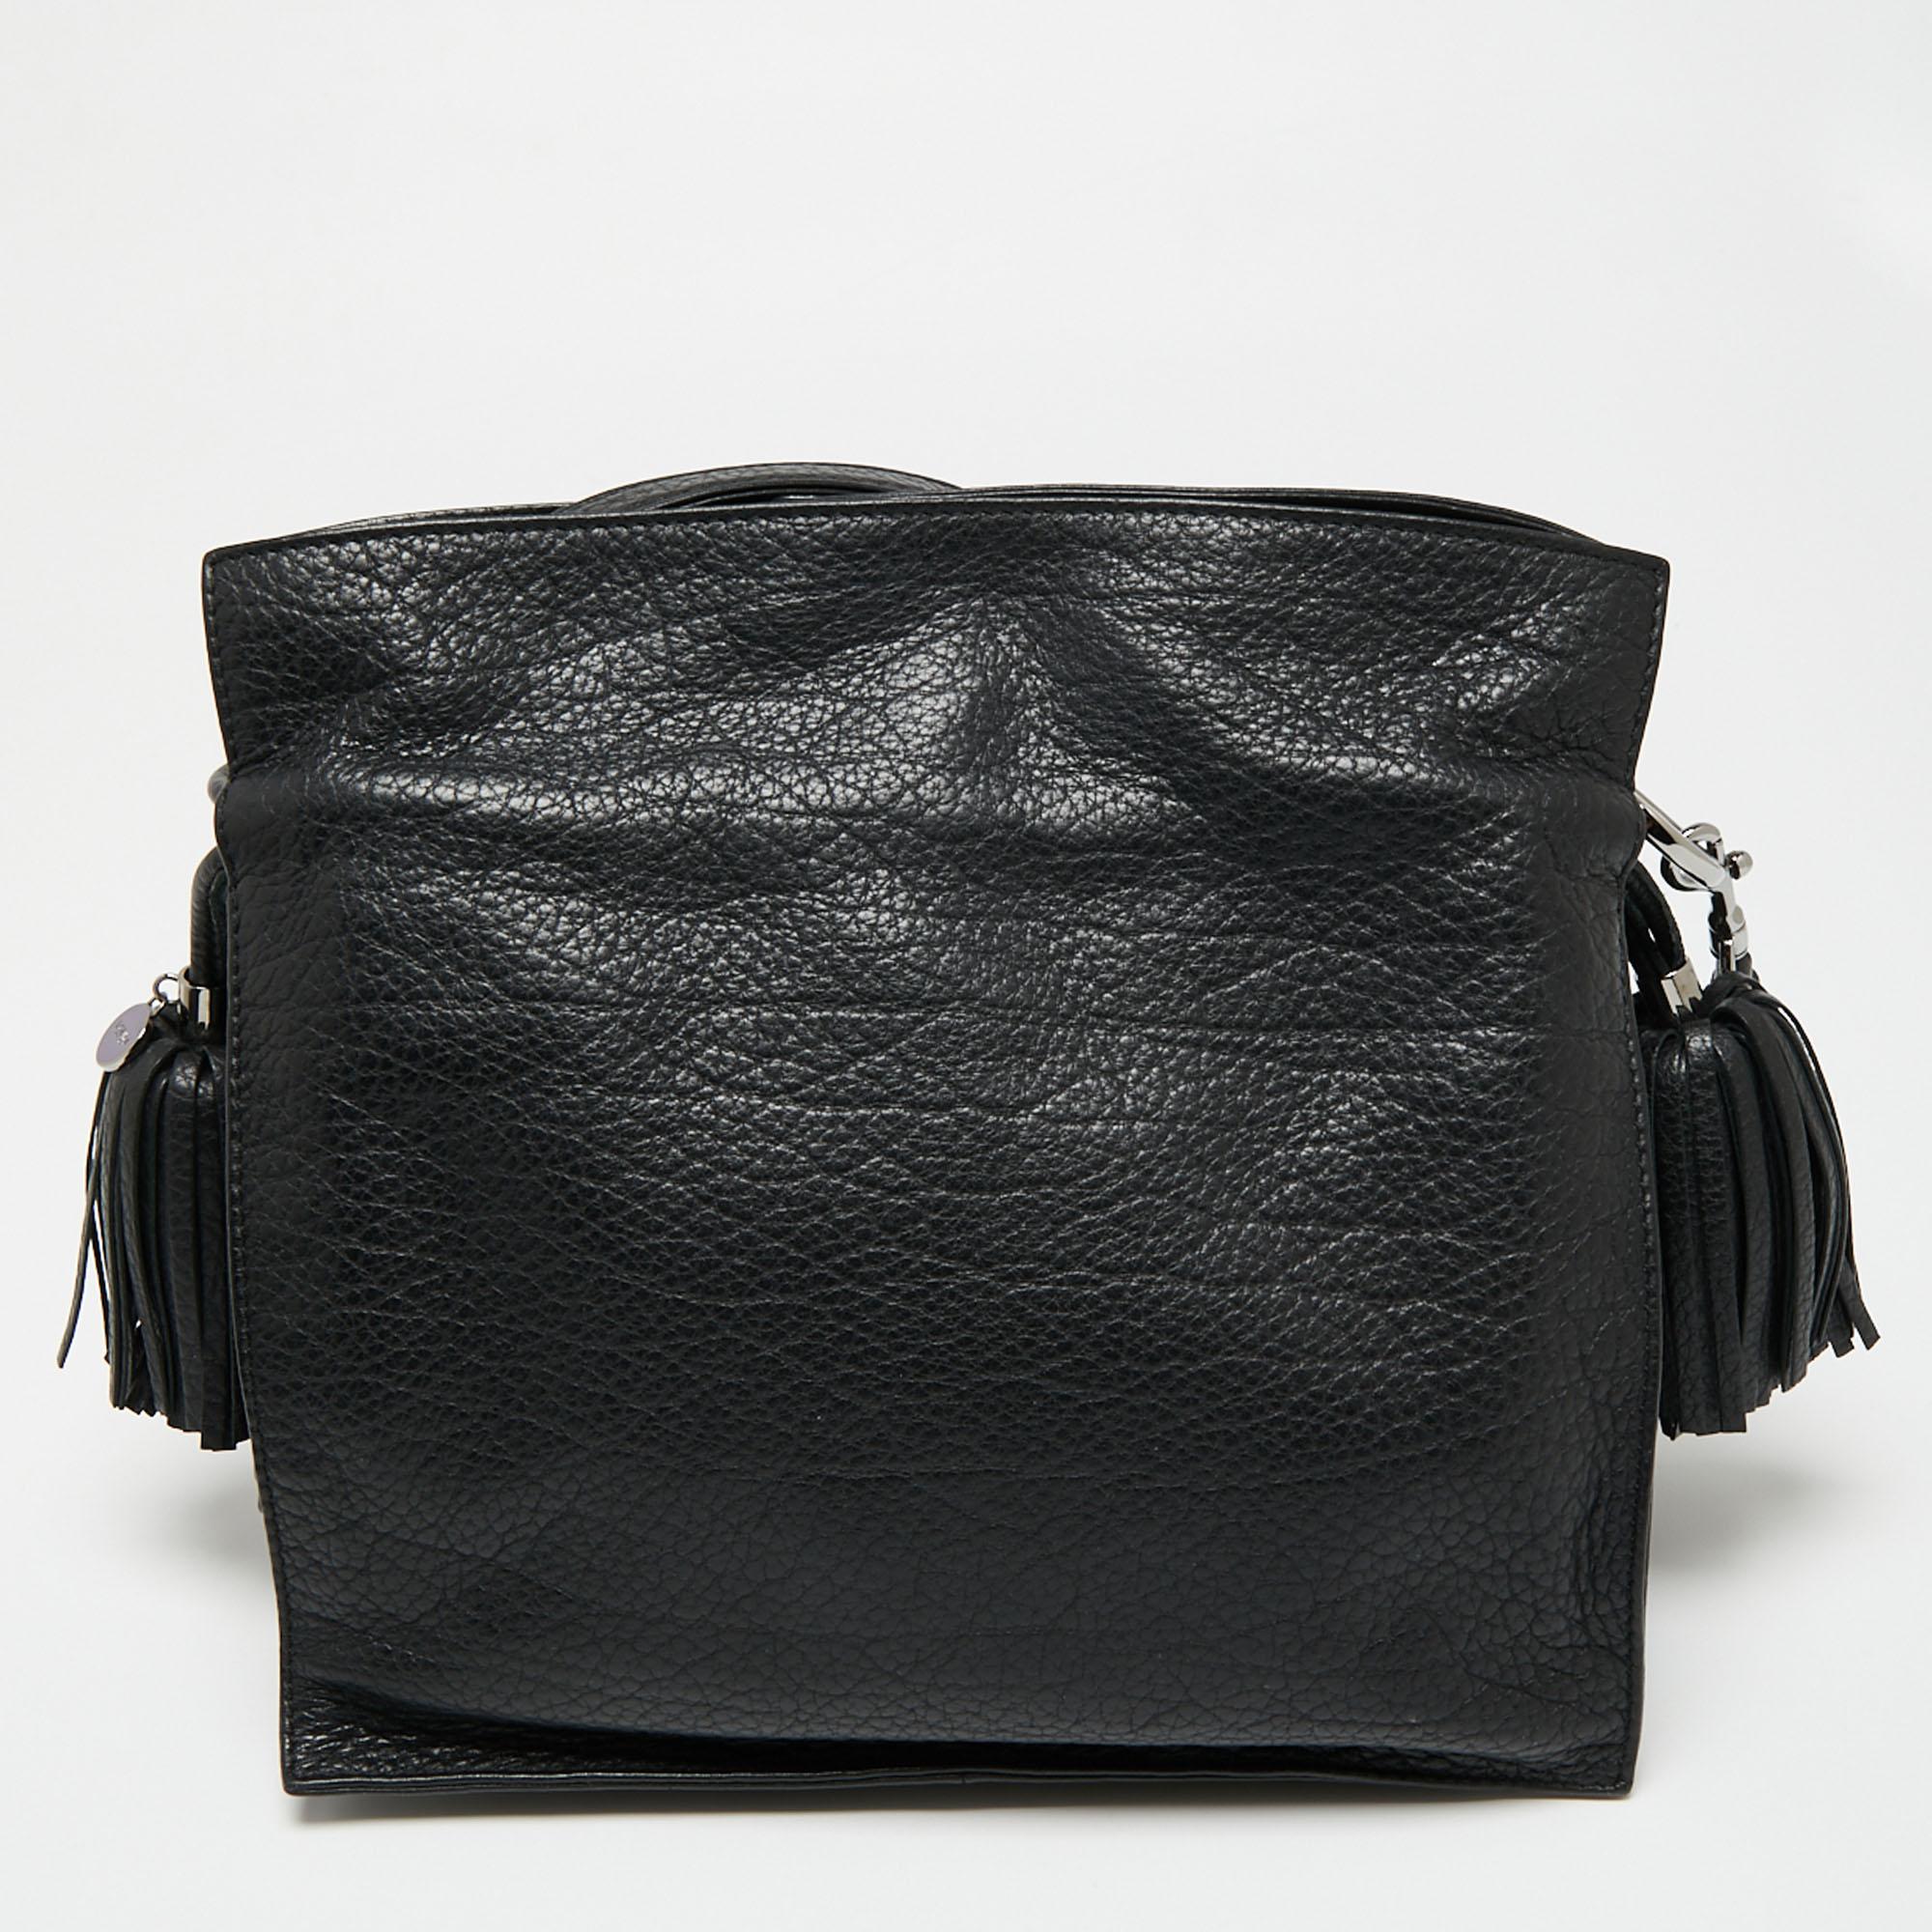 Understated and sophisticated, this Flamenco bag comes from the iconic house of Loewe. Crafted from quality leather, it comes in a classic shade of black. It is styled with lovely tassel detailing on the sides, a small embossed logo, a long shoulder